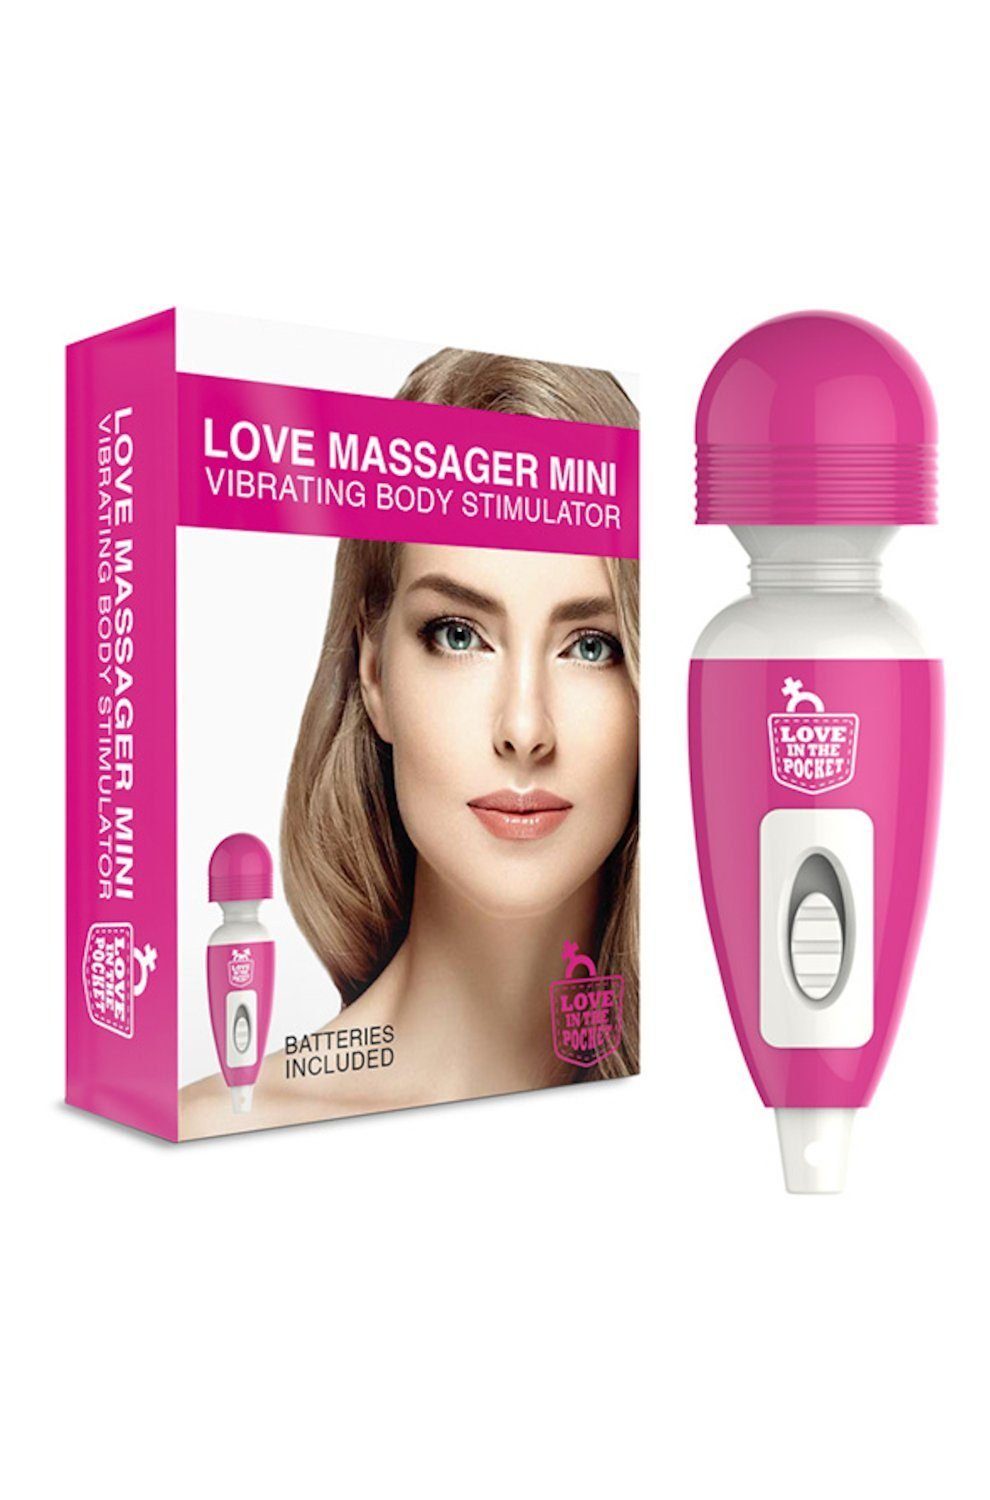 Love in the Pocket Wand Massager Love in the Pocket - Love Massager Mini Vibrating Body Stimulator